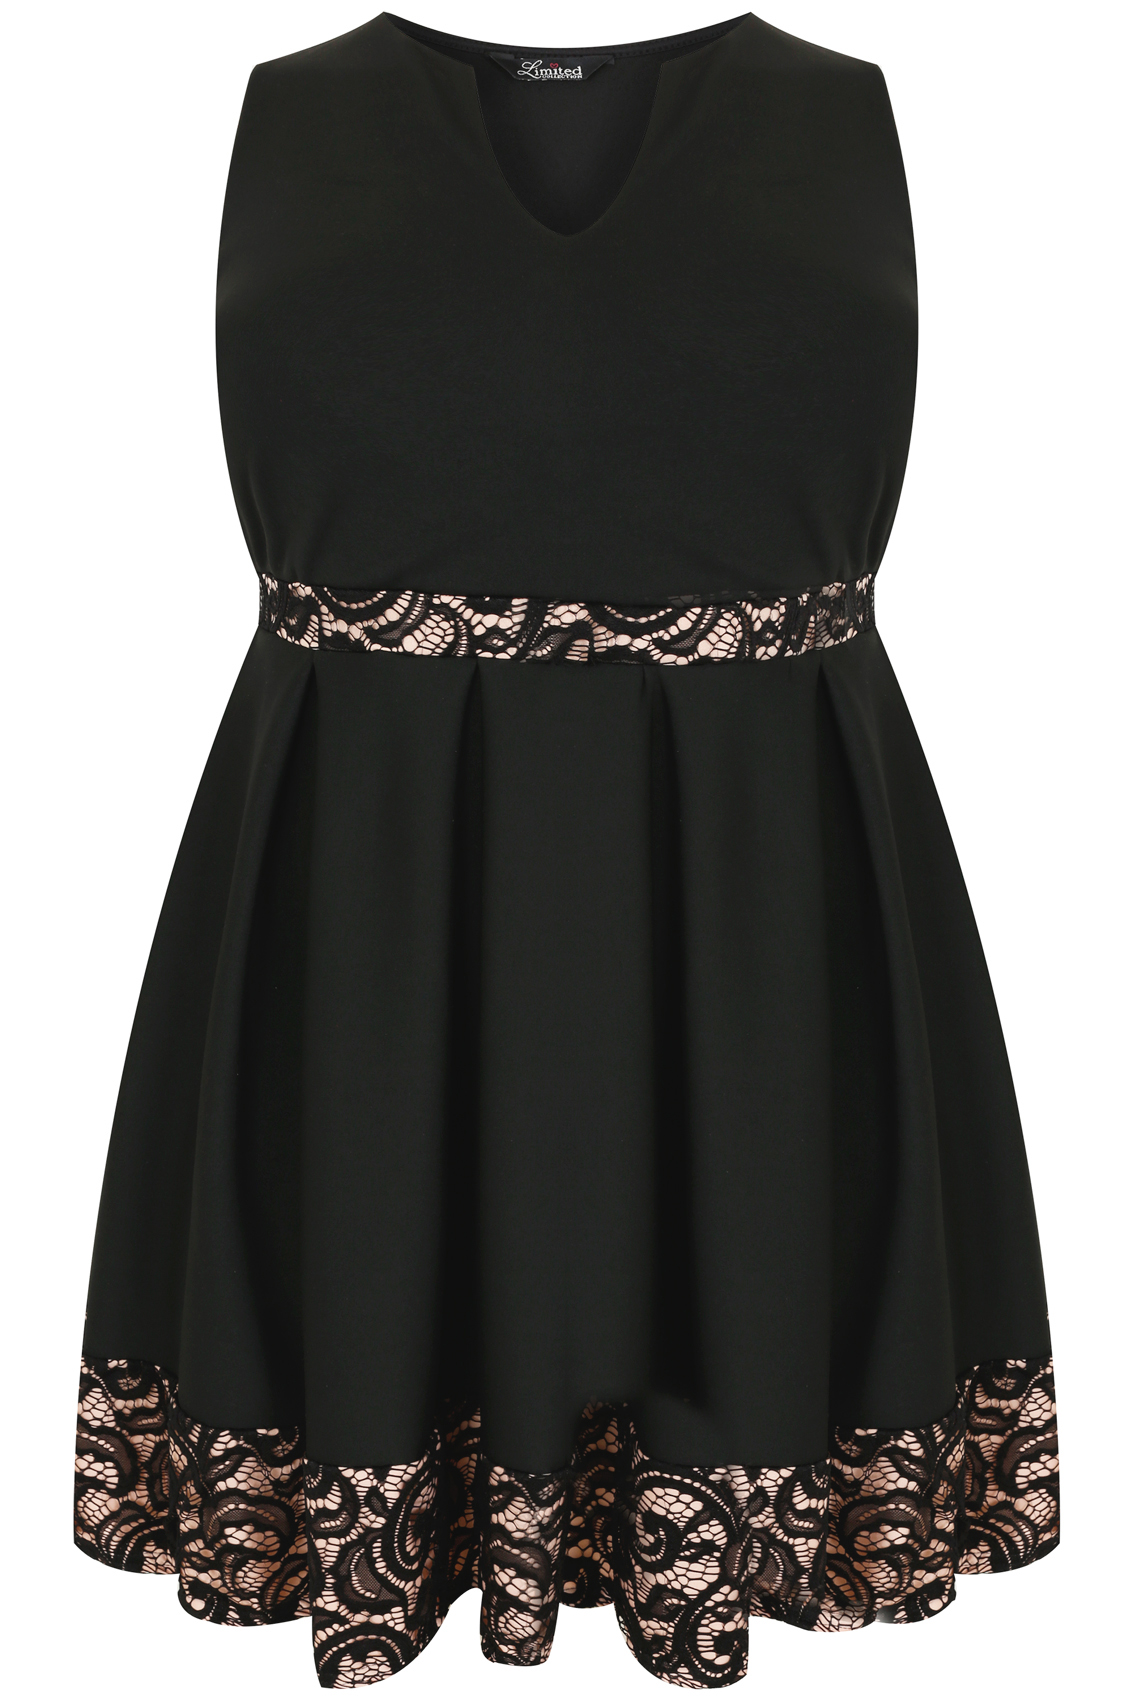 Black Skater Dress With Nude Lace Panels Notch Neck Plus Size To